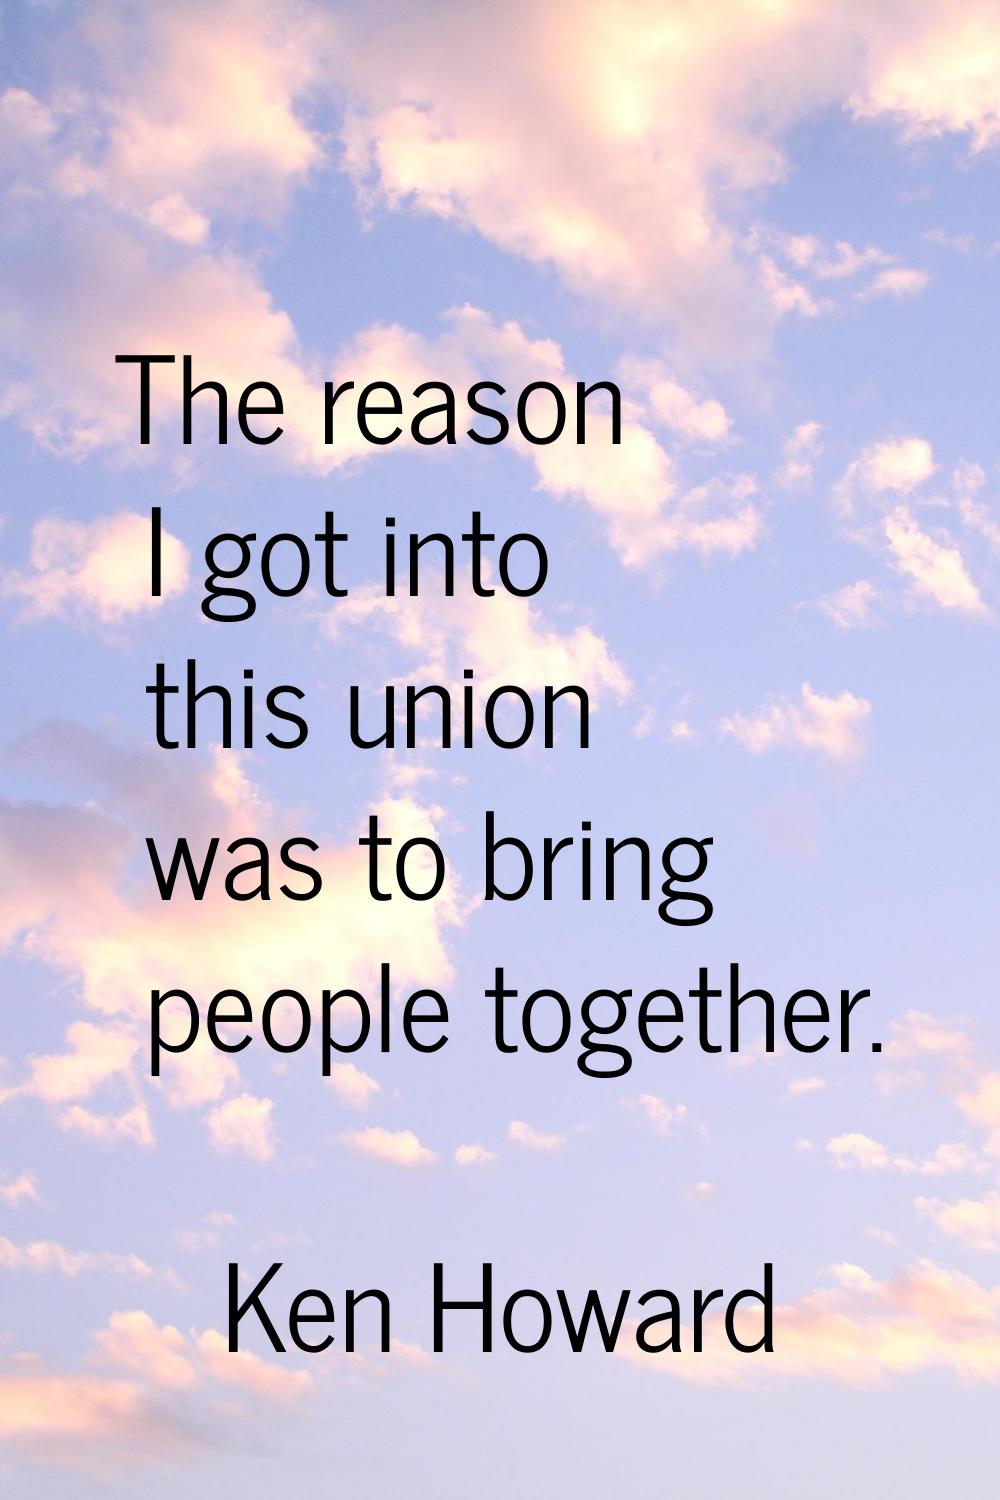 The reason I got into this union was to bring people together.